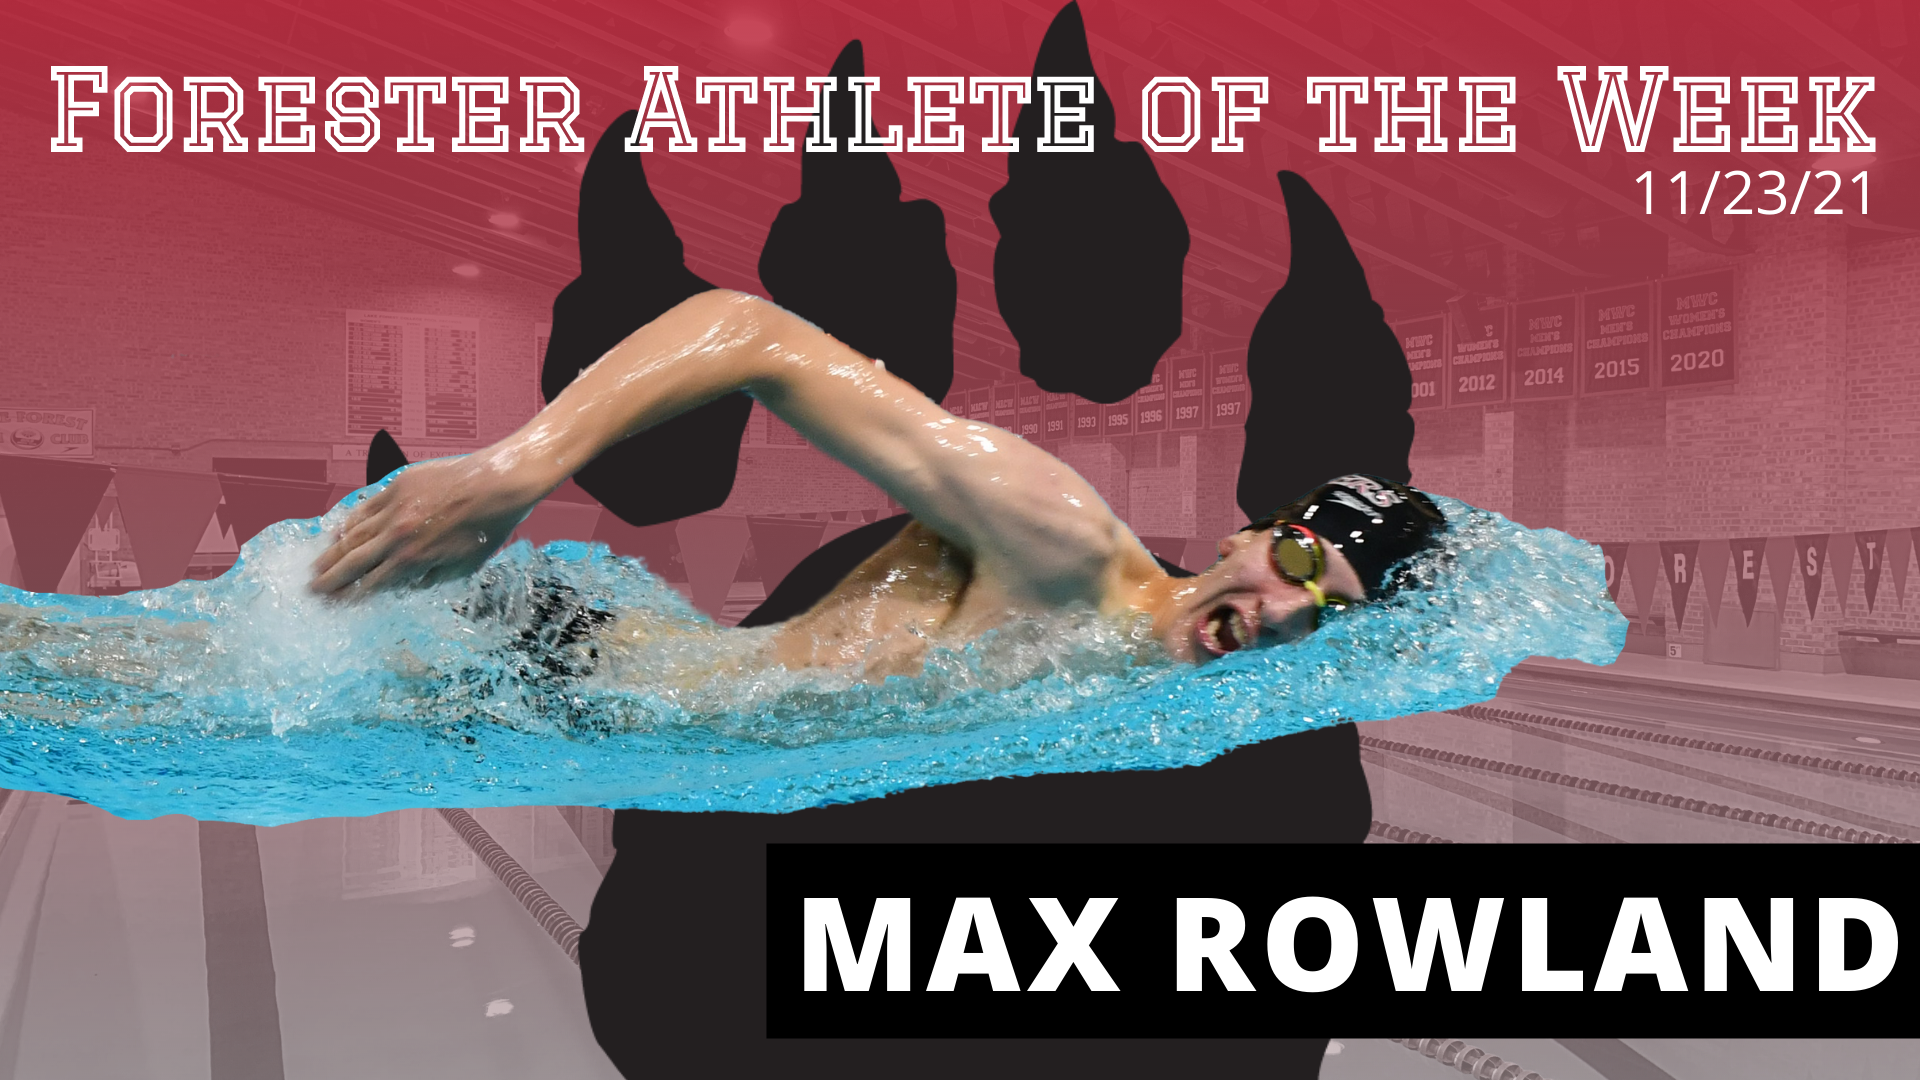 Max Rowland Named Men's Forester Athlete of the Week